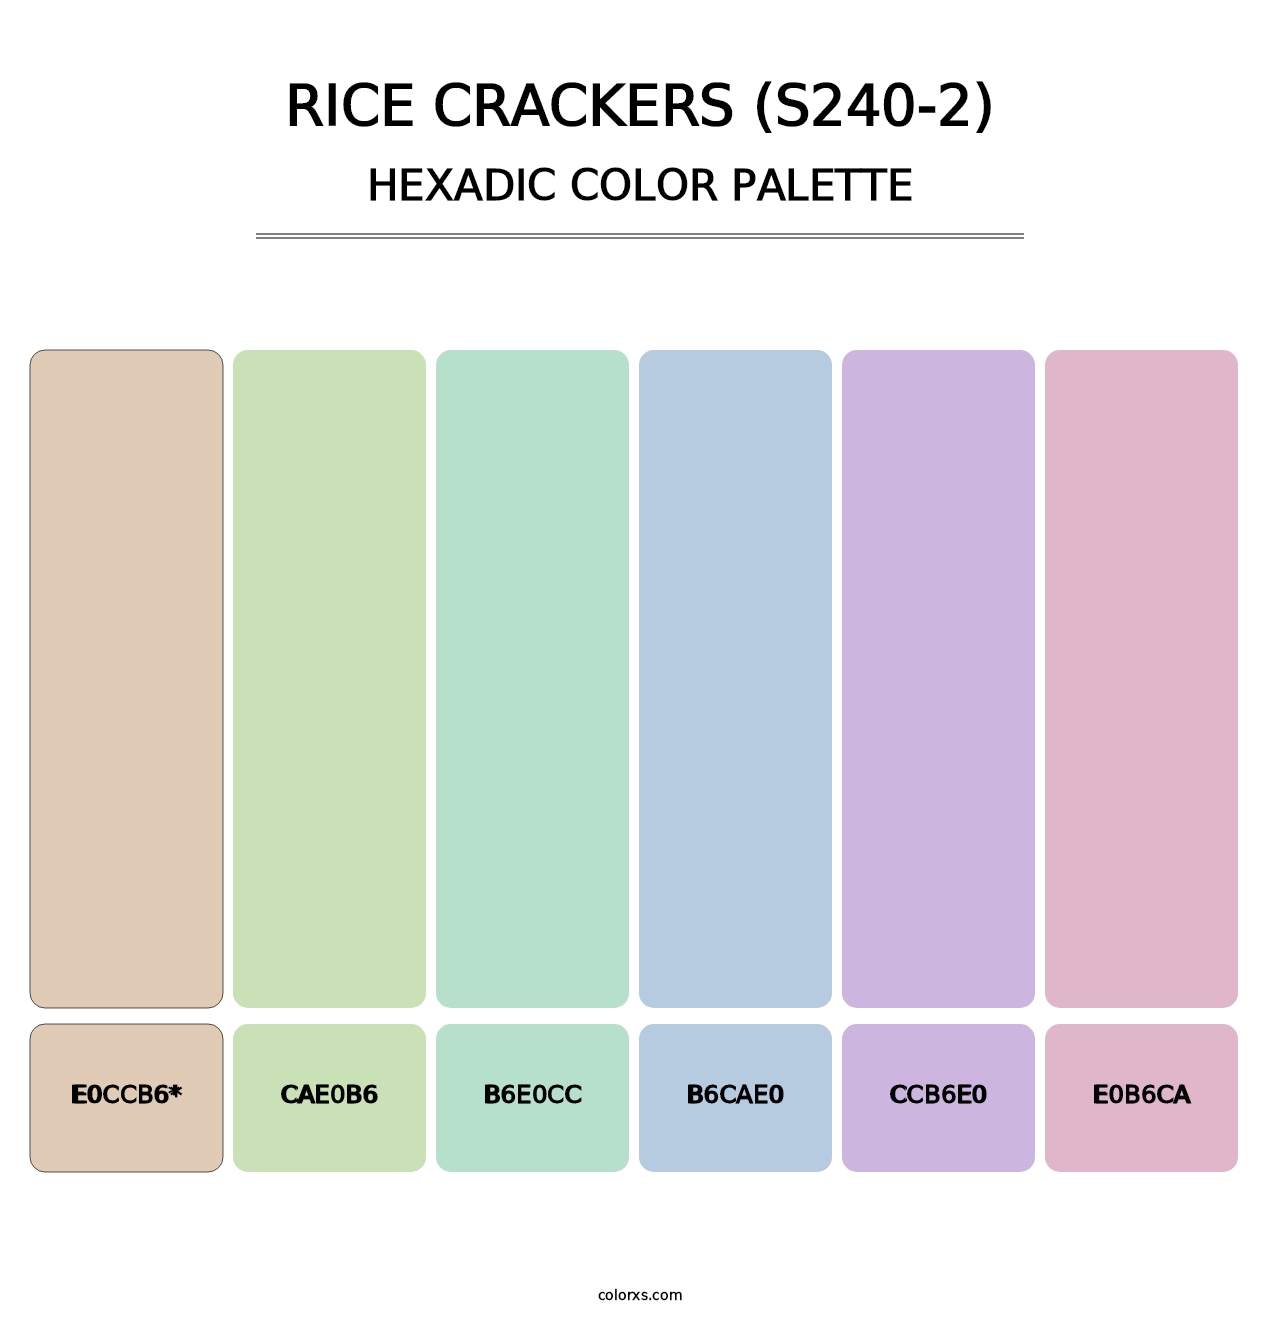 Rice Crackers (S240-2) - Hexadic Color Palette